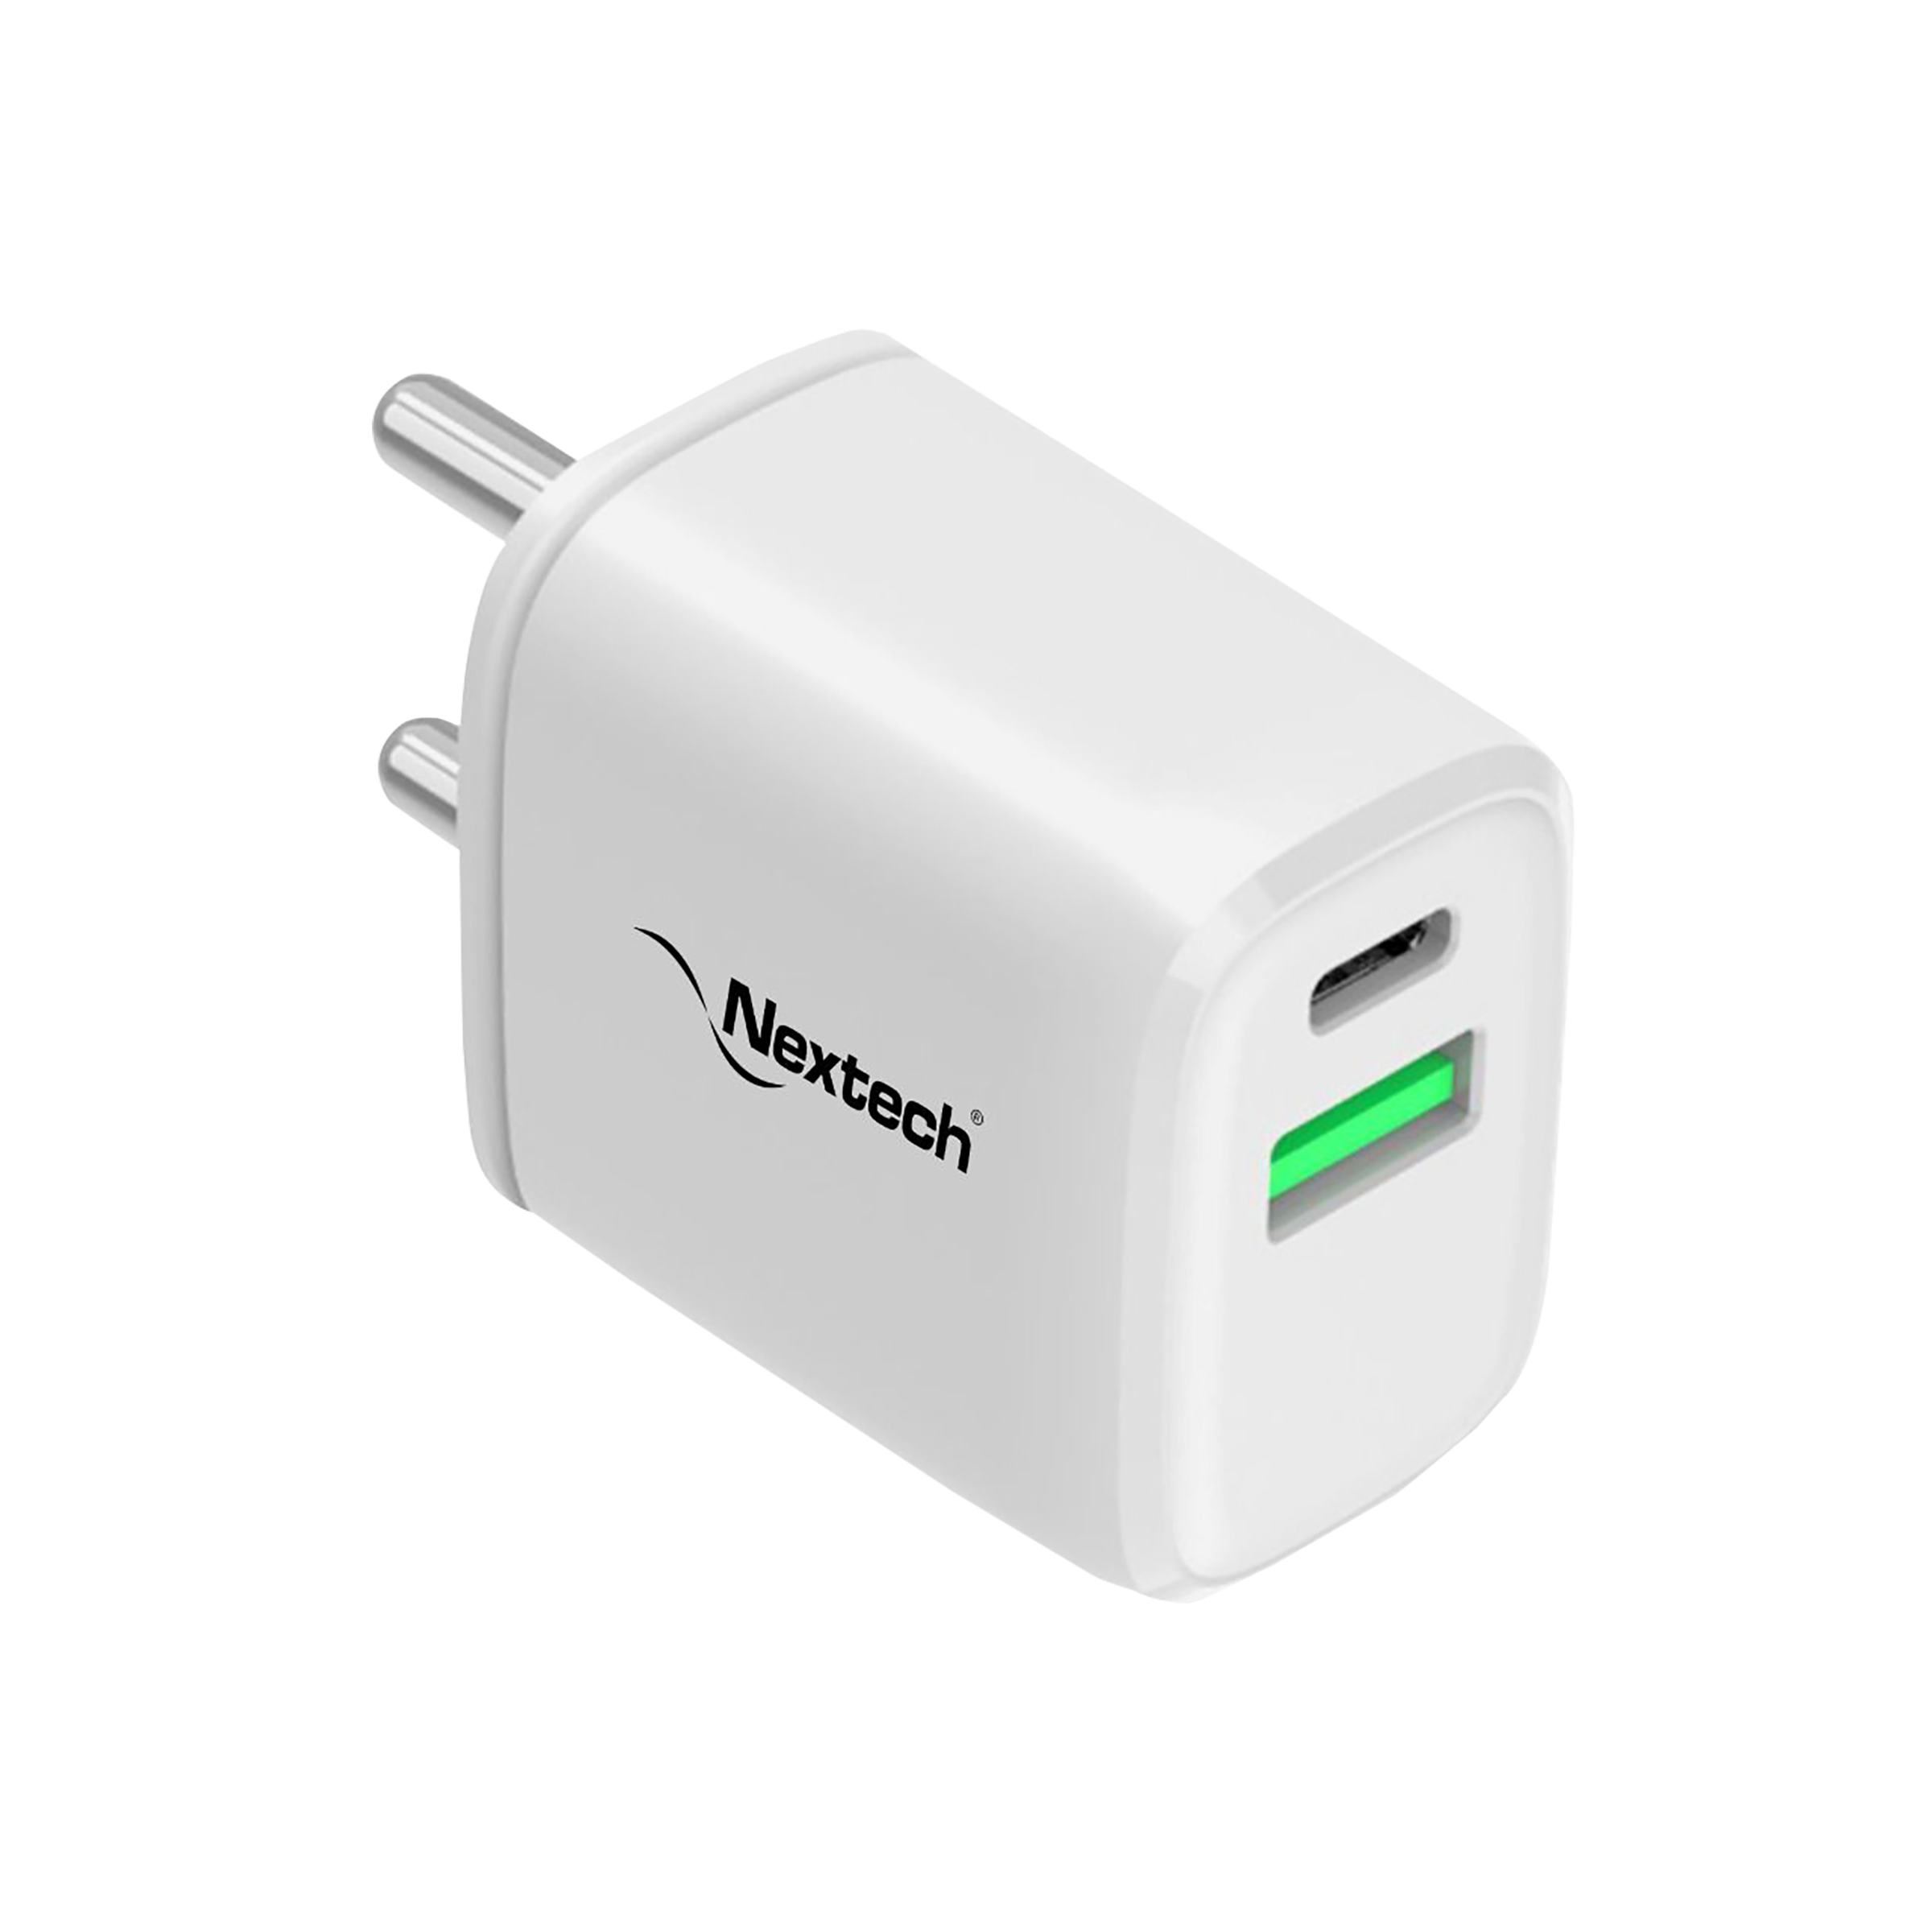 Nextech 24W Type A & Type C 2-Port Fast Charger (Adapter Only, Over-Current Protection, White)_1